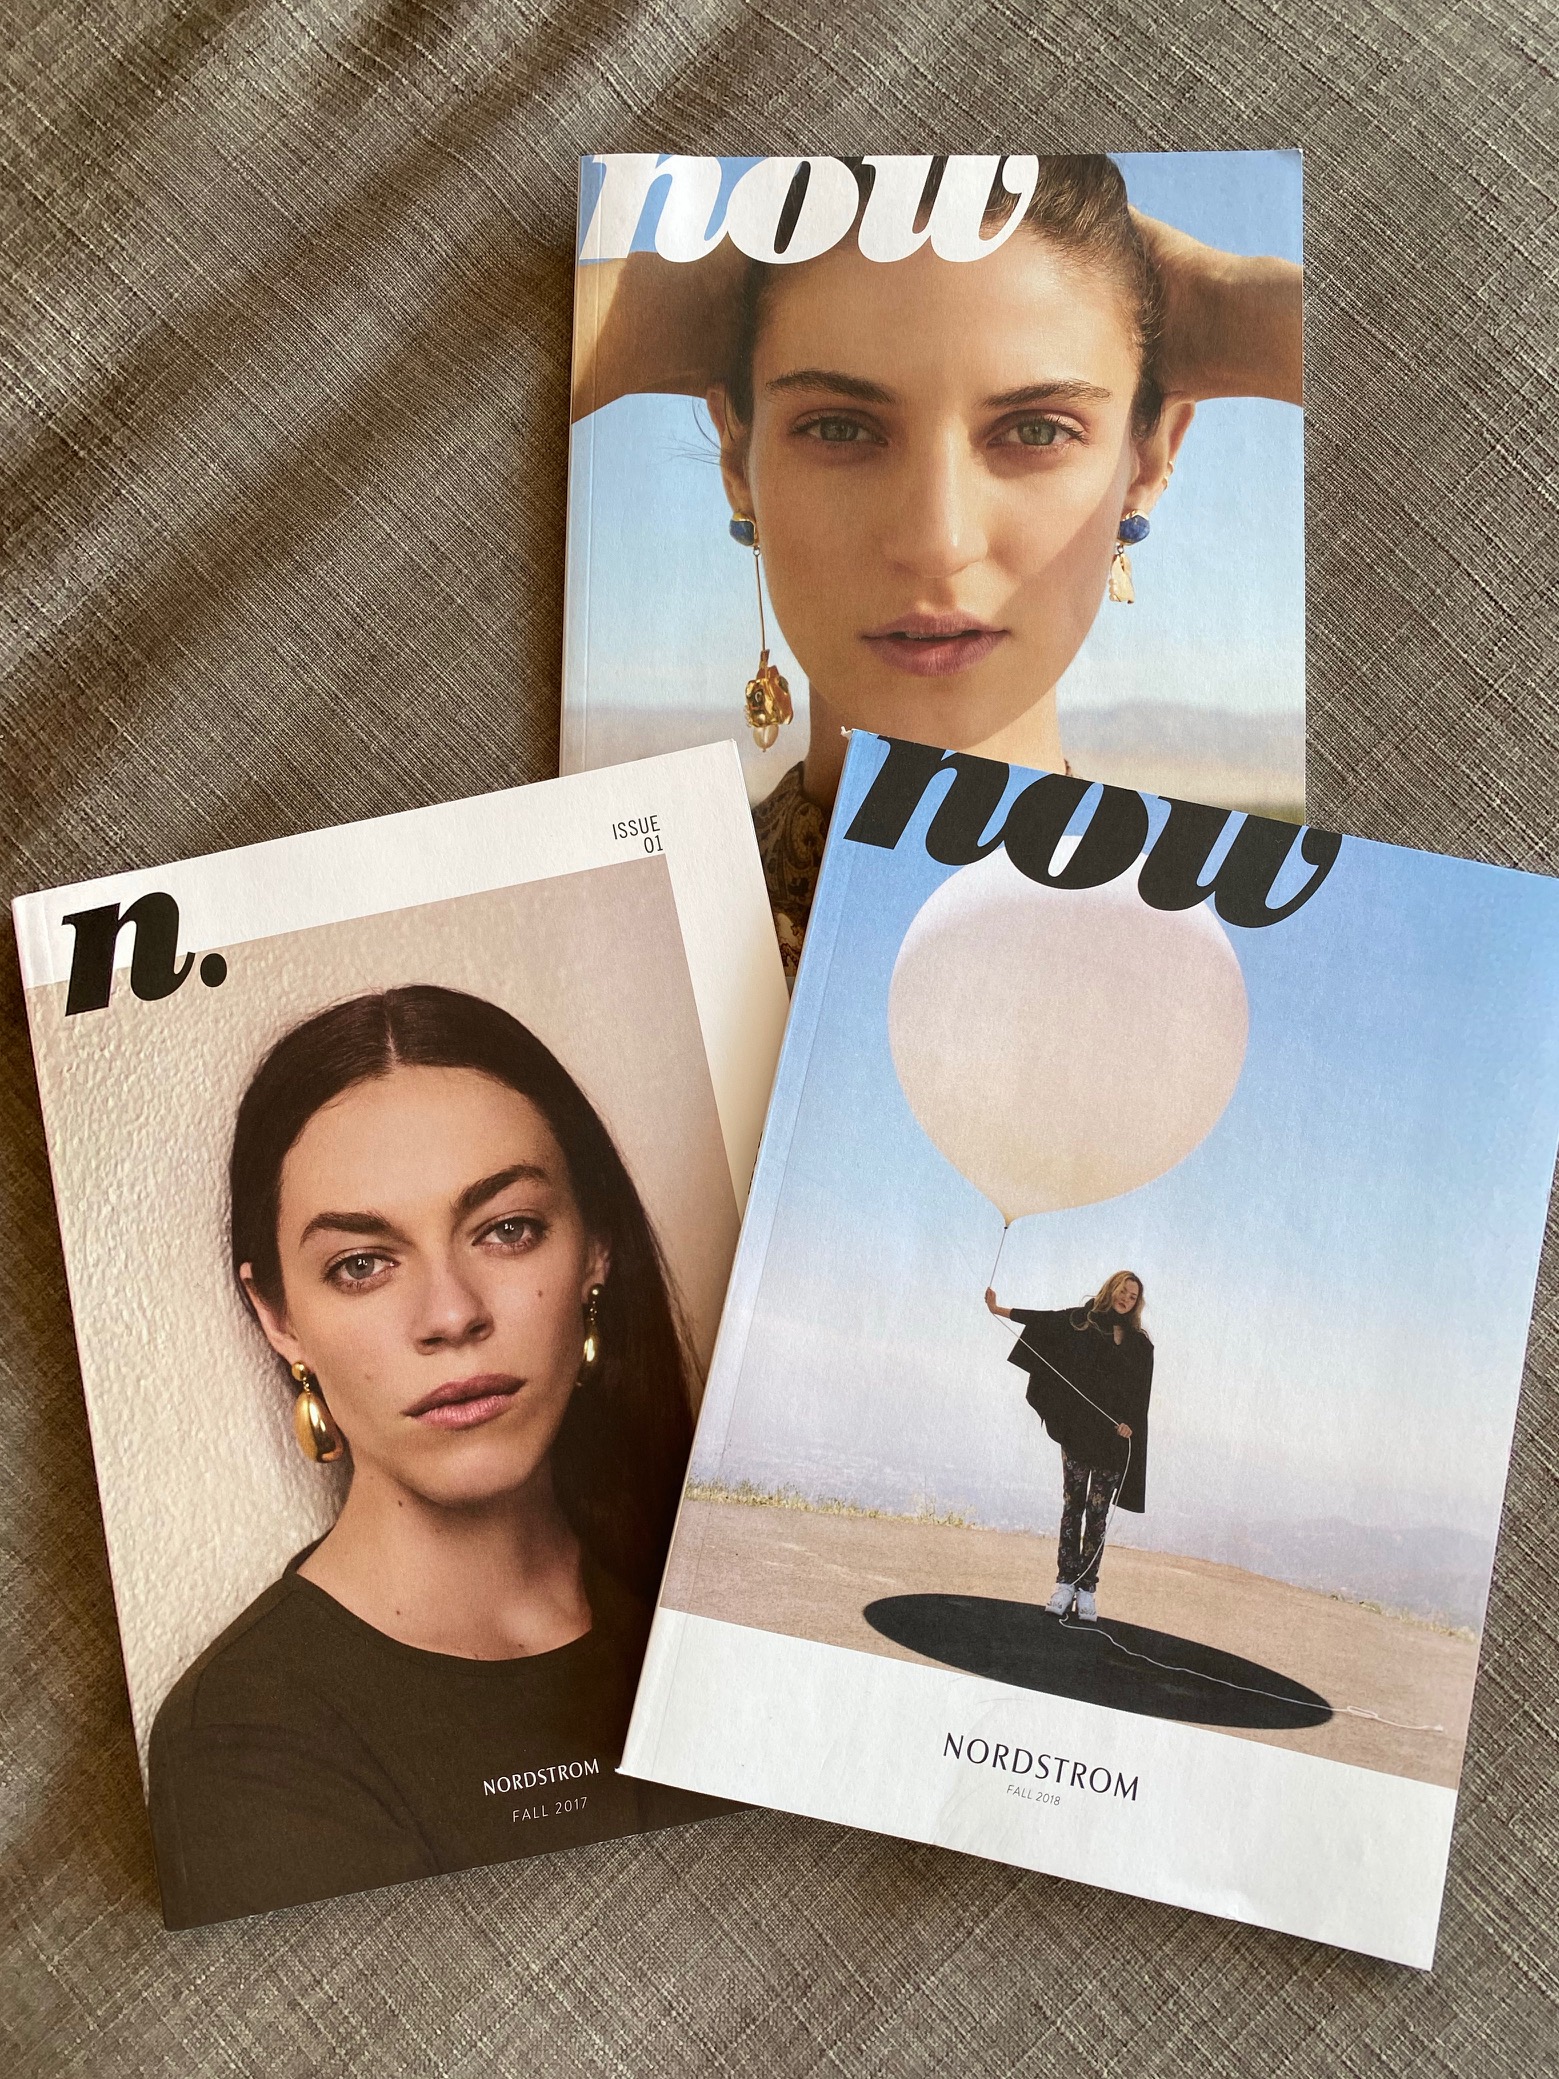 Nordstrom: N and Now magazine covers